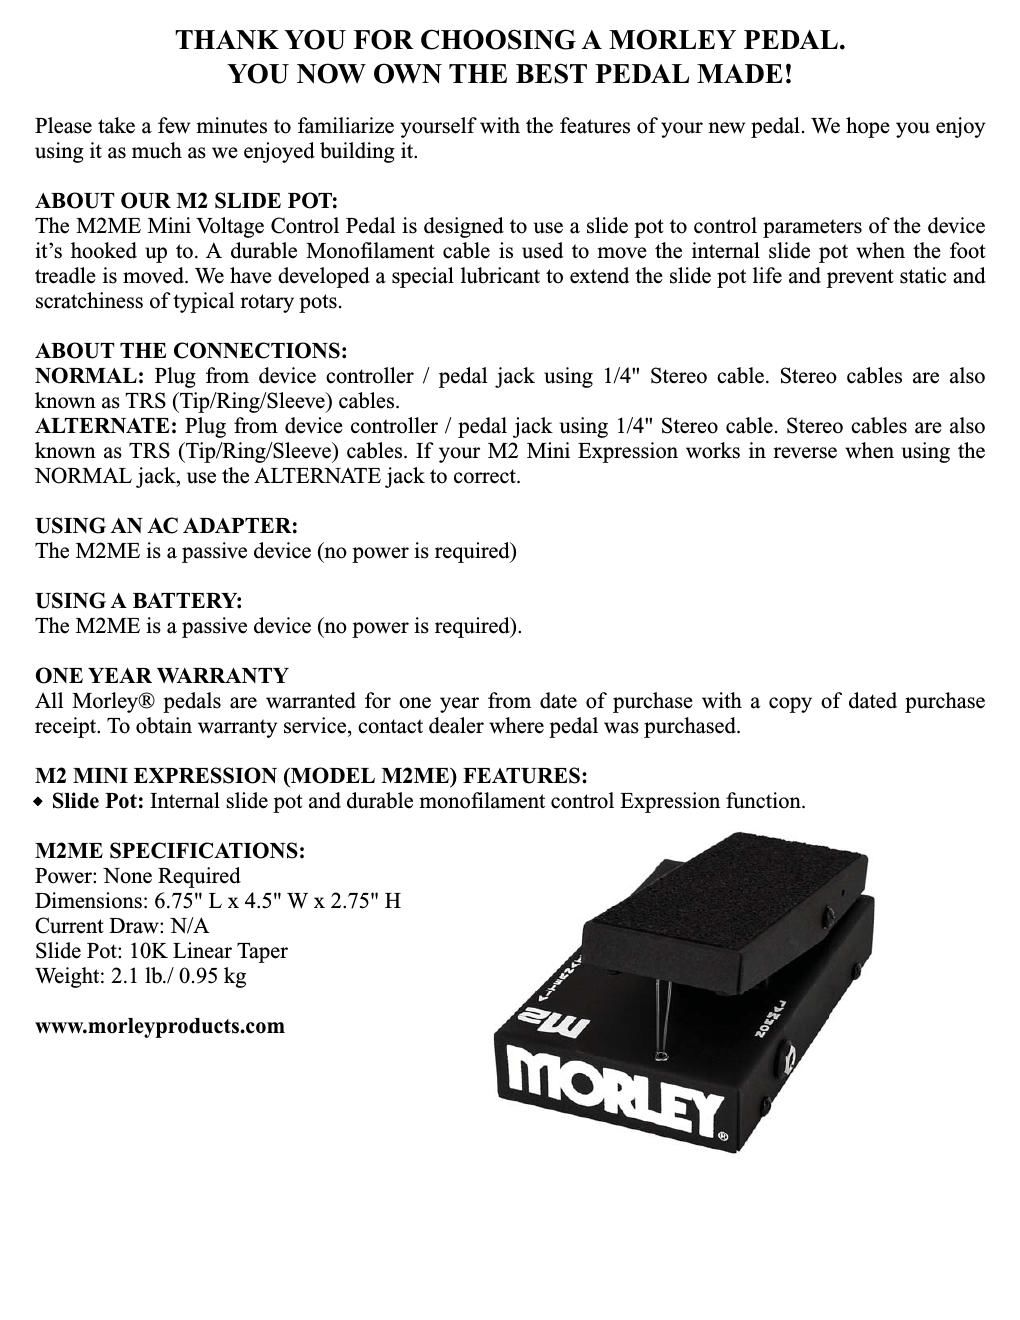 morley m2me mini expression m2 pedal instruction insert full page